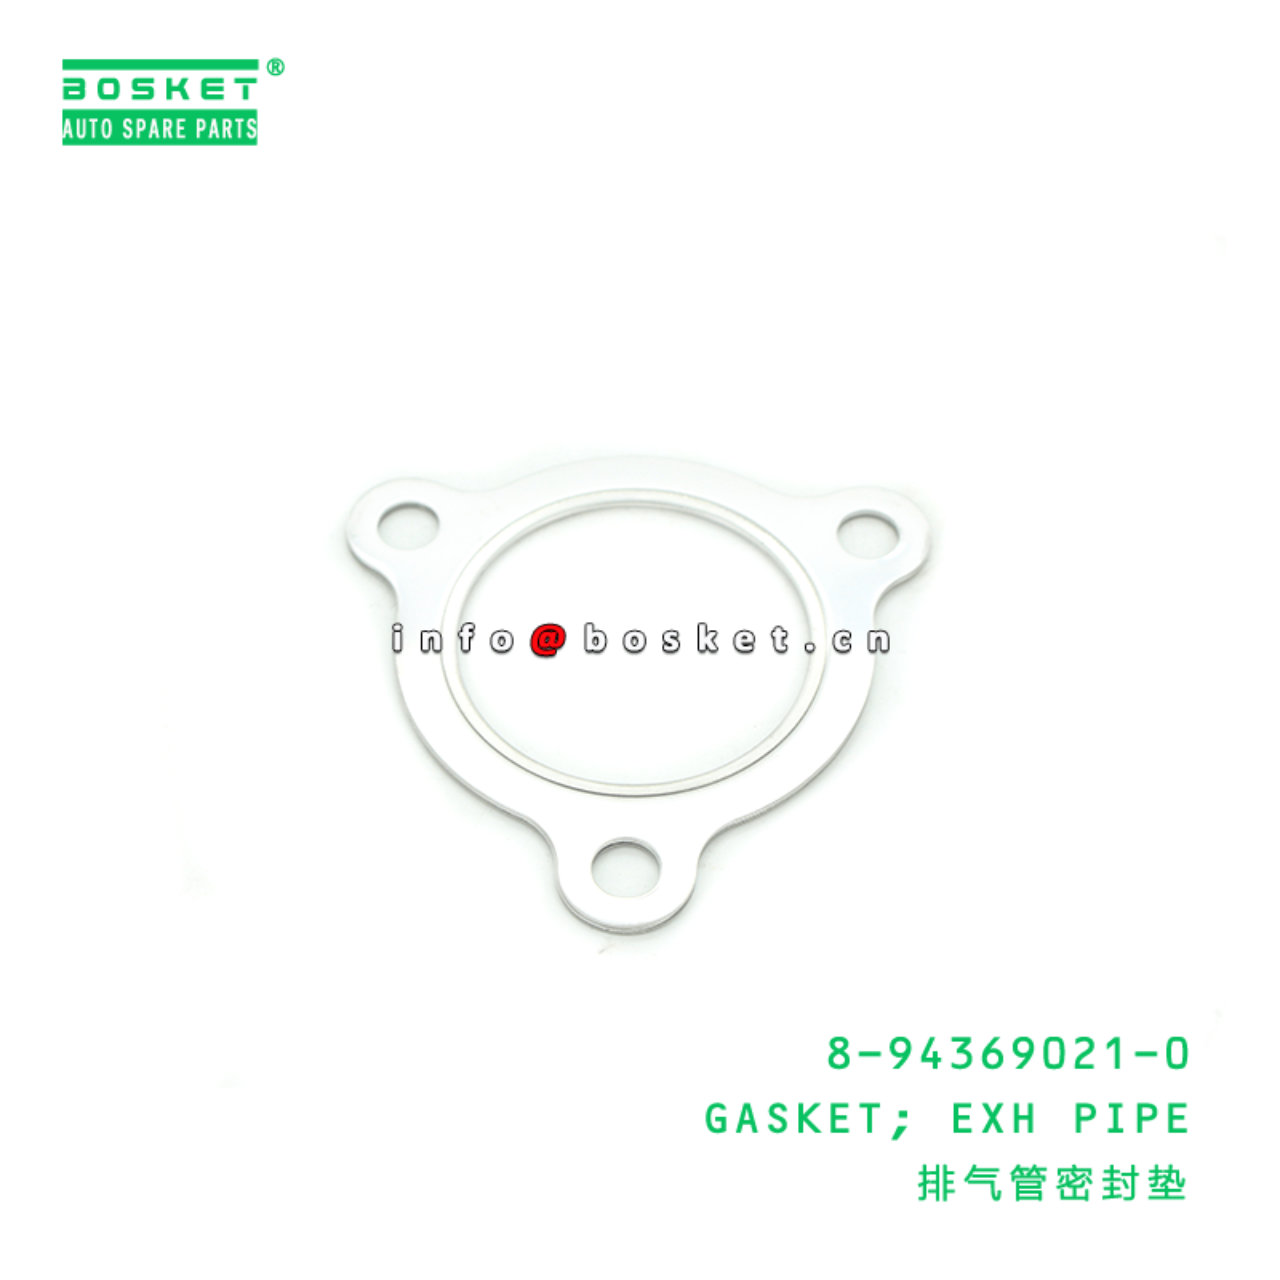  8-94369021-0 Exhaust Pipe Gasket 8943690210 Suitable for ISUZU 4BD1 4JJ1